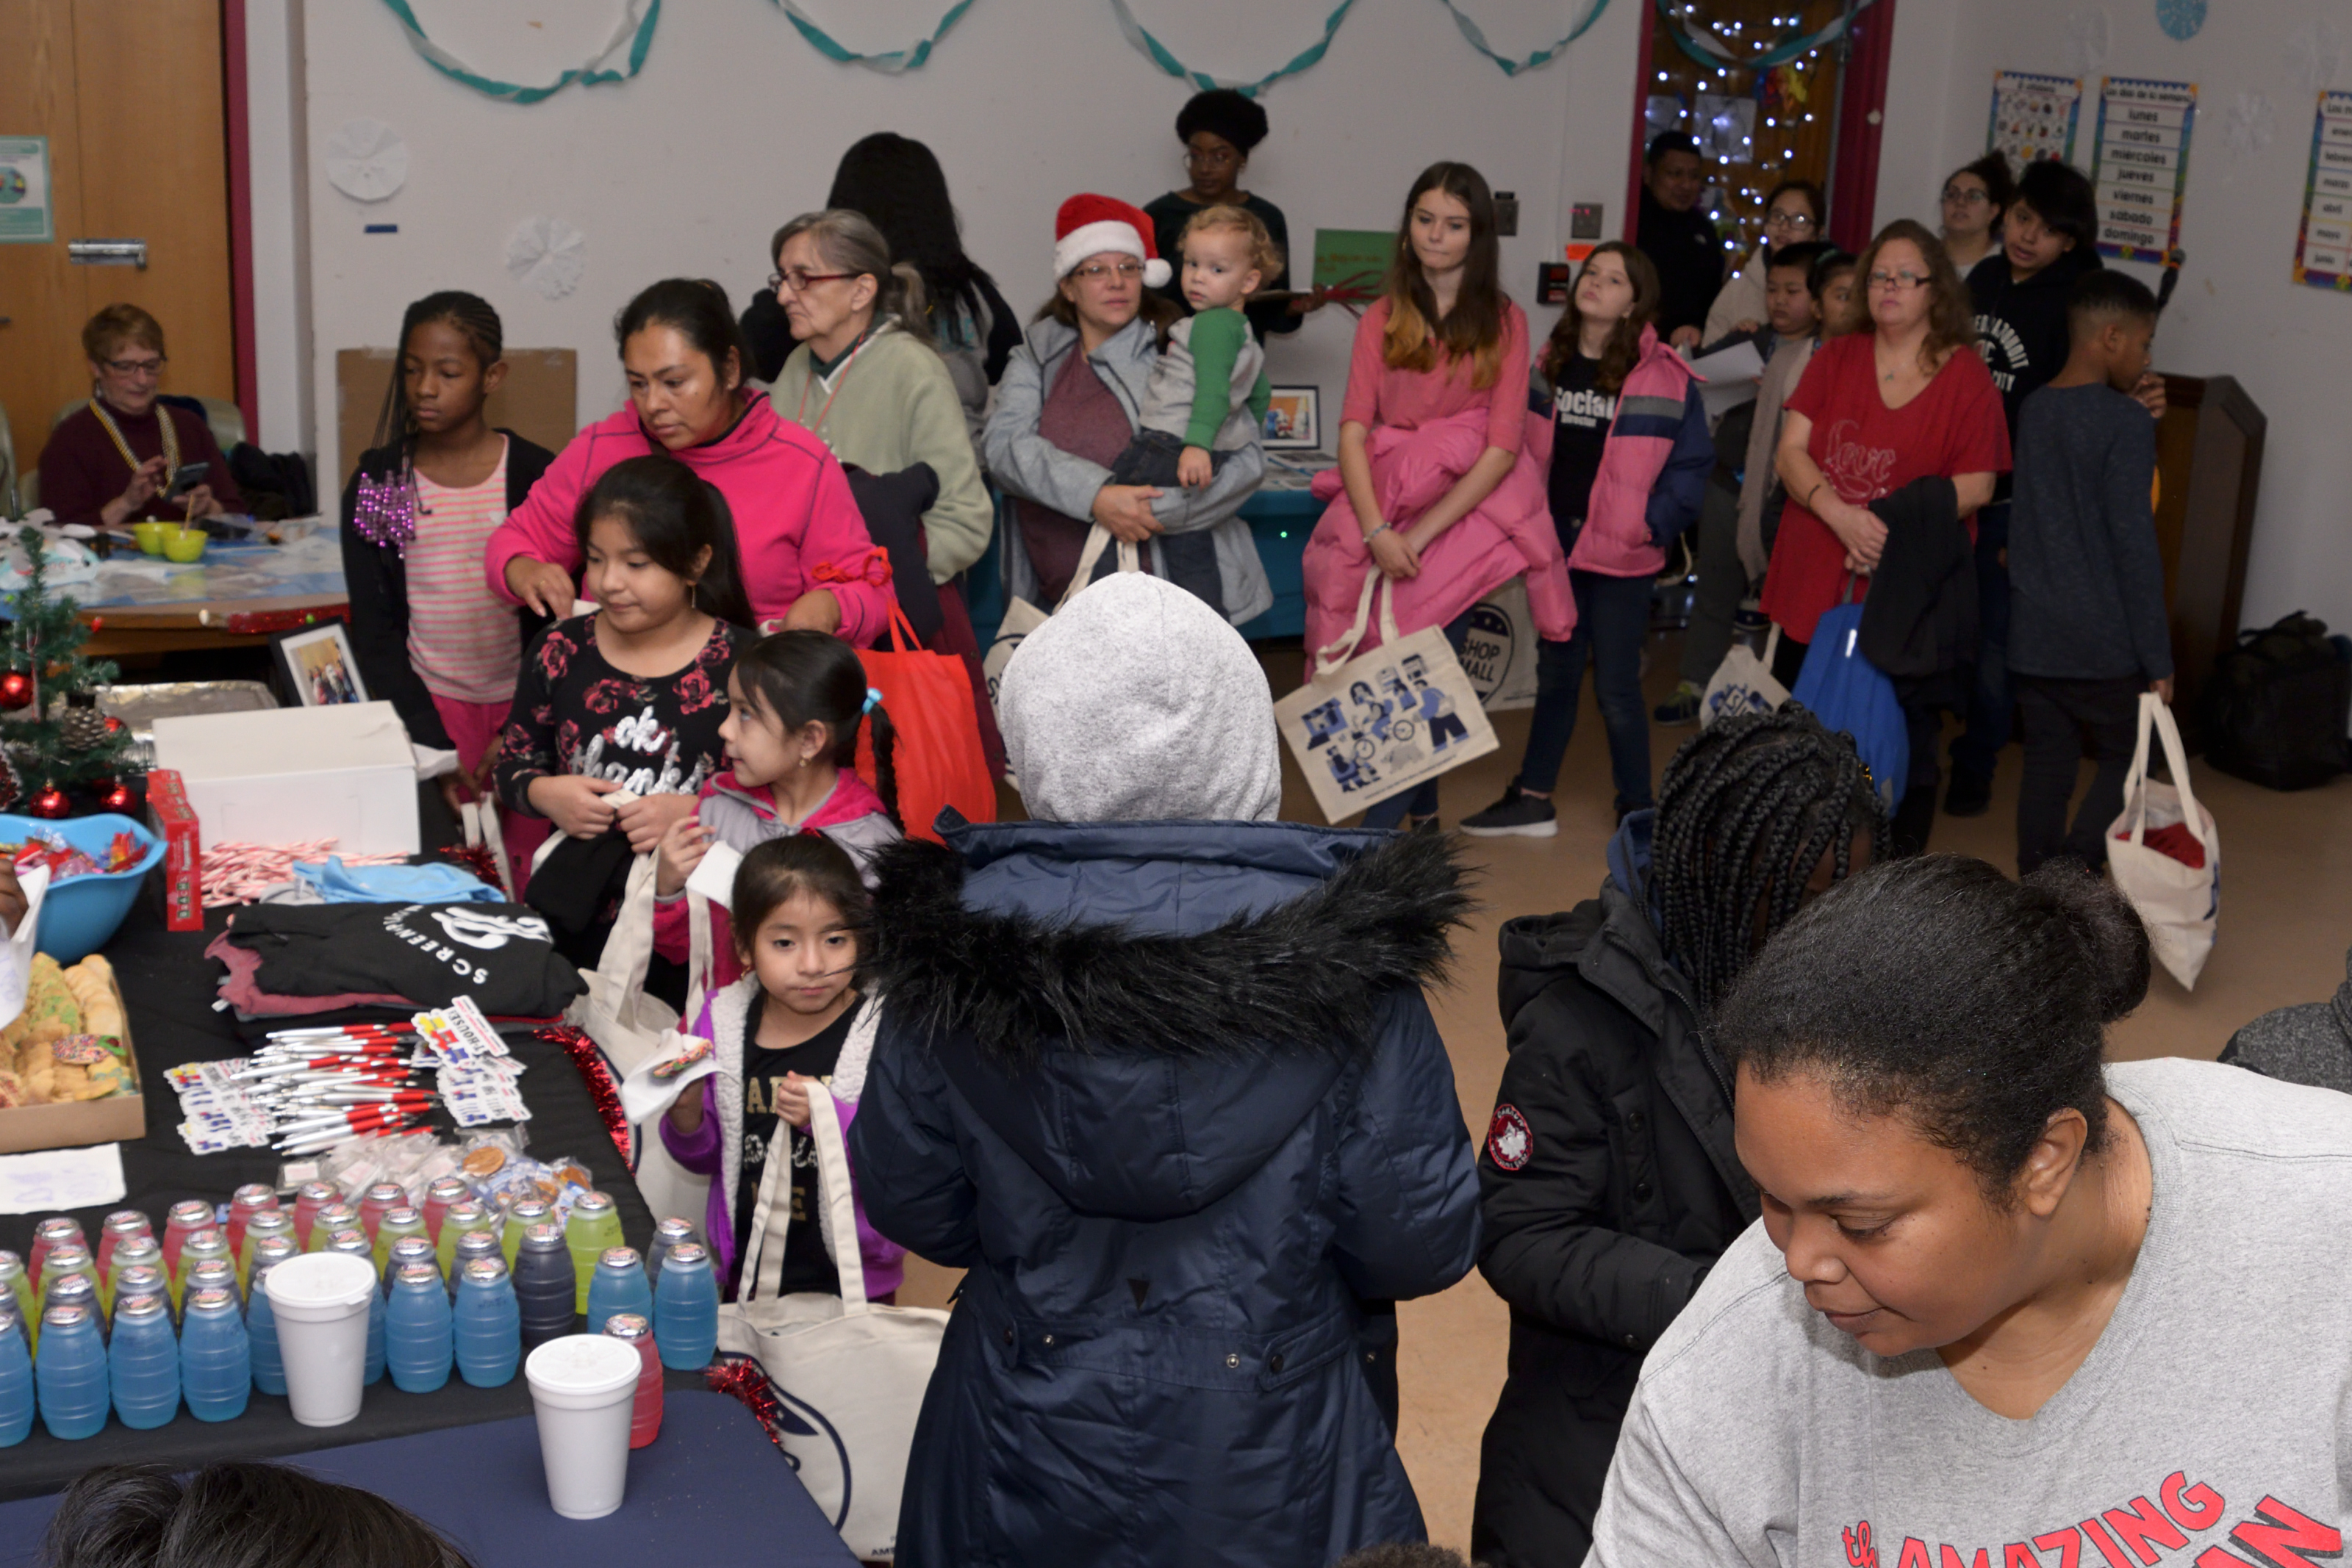 Families line up for toys, snacks, and games at the Annual Winter Festival in Olney. Bas Slabbers/WHYY